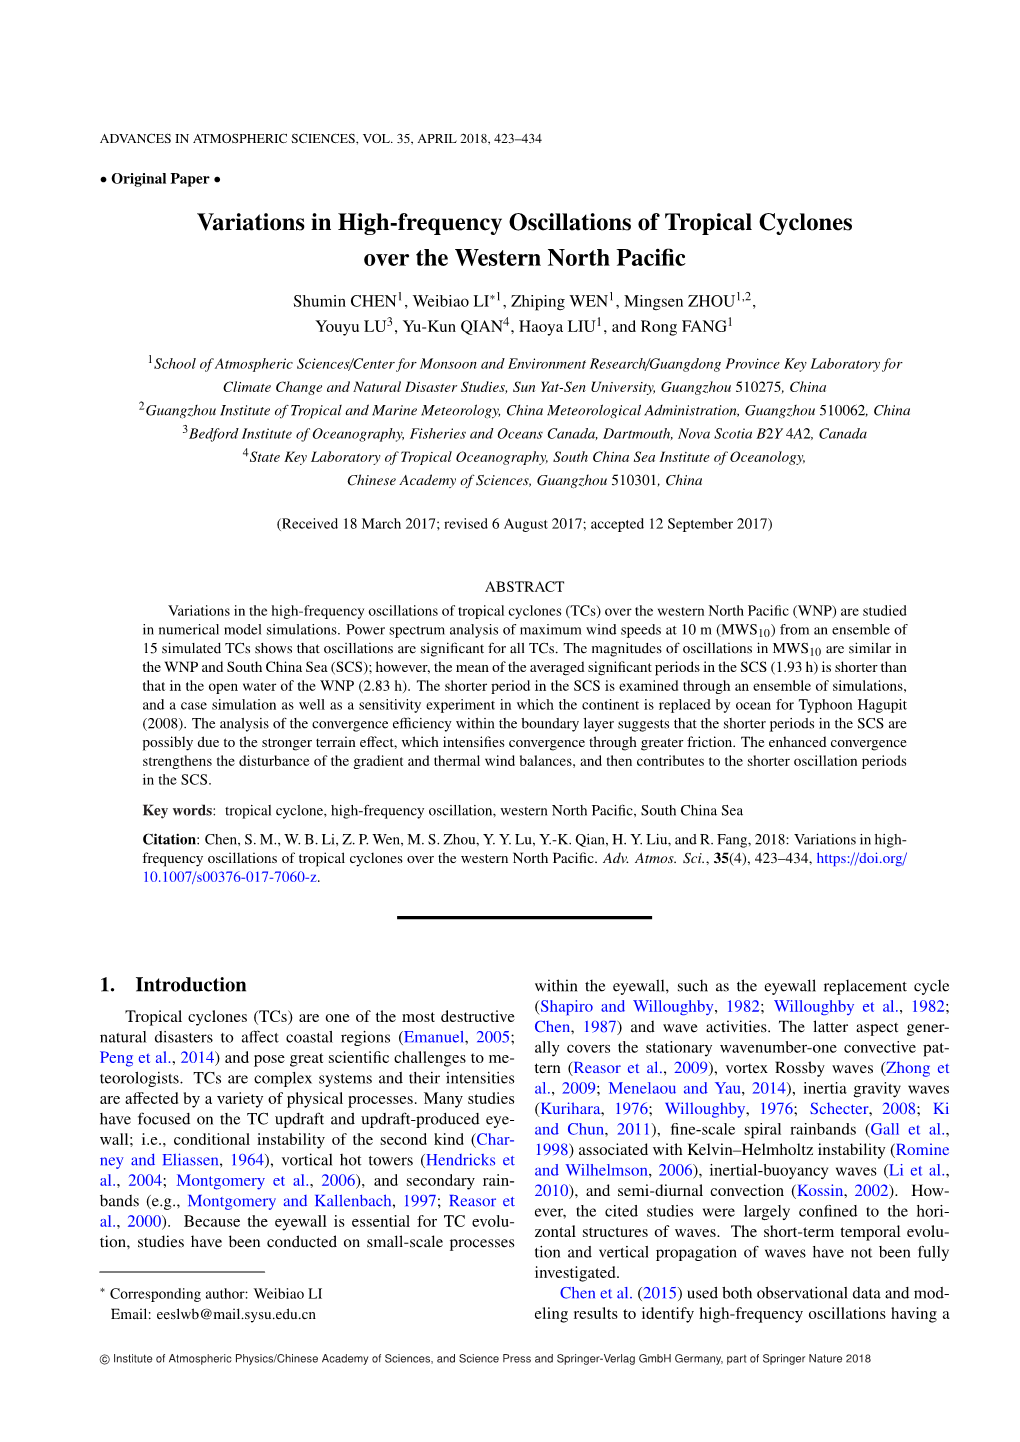 Variations in High-Frequency Oscillations of Tropical Cyclones Over the Western North Paciﬁc